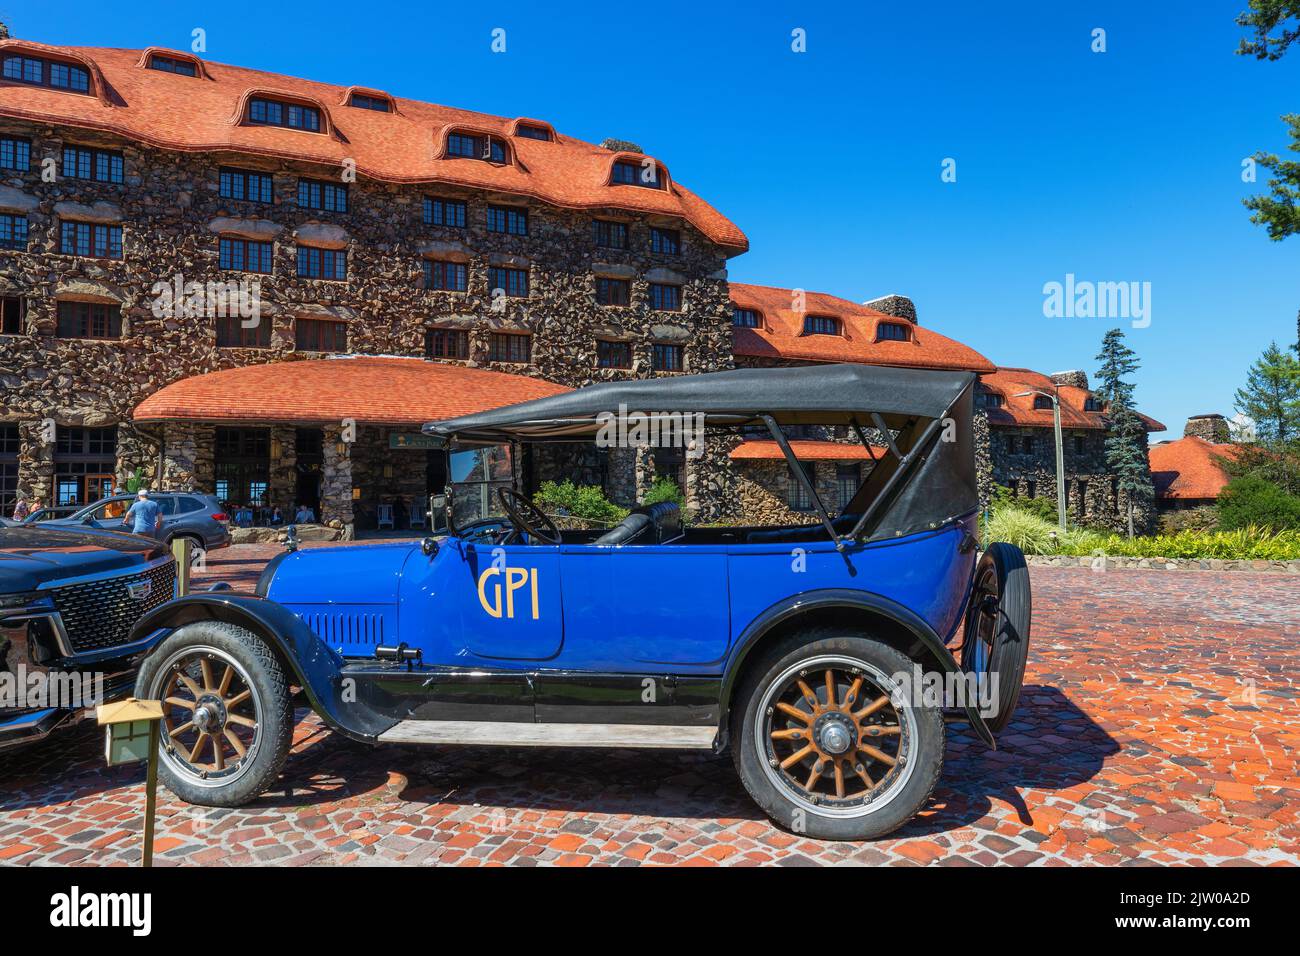 Ashville, North Carolina, USA - August 27, 2022:  An old antique touring car sits in front of the Omni Grove Park Inn. Stock Photo